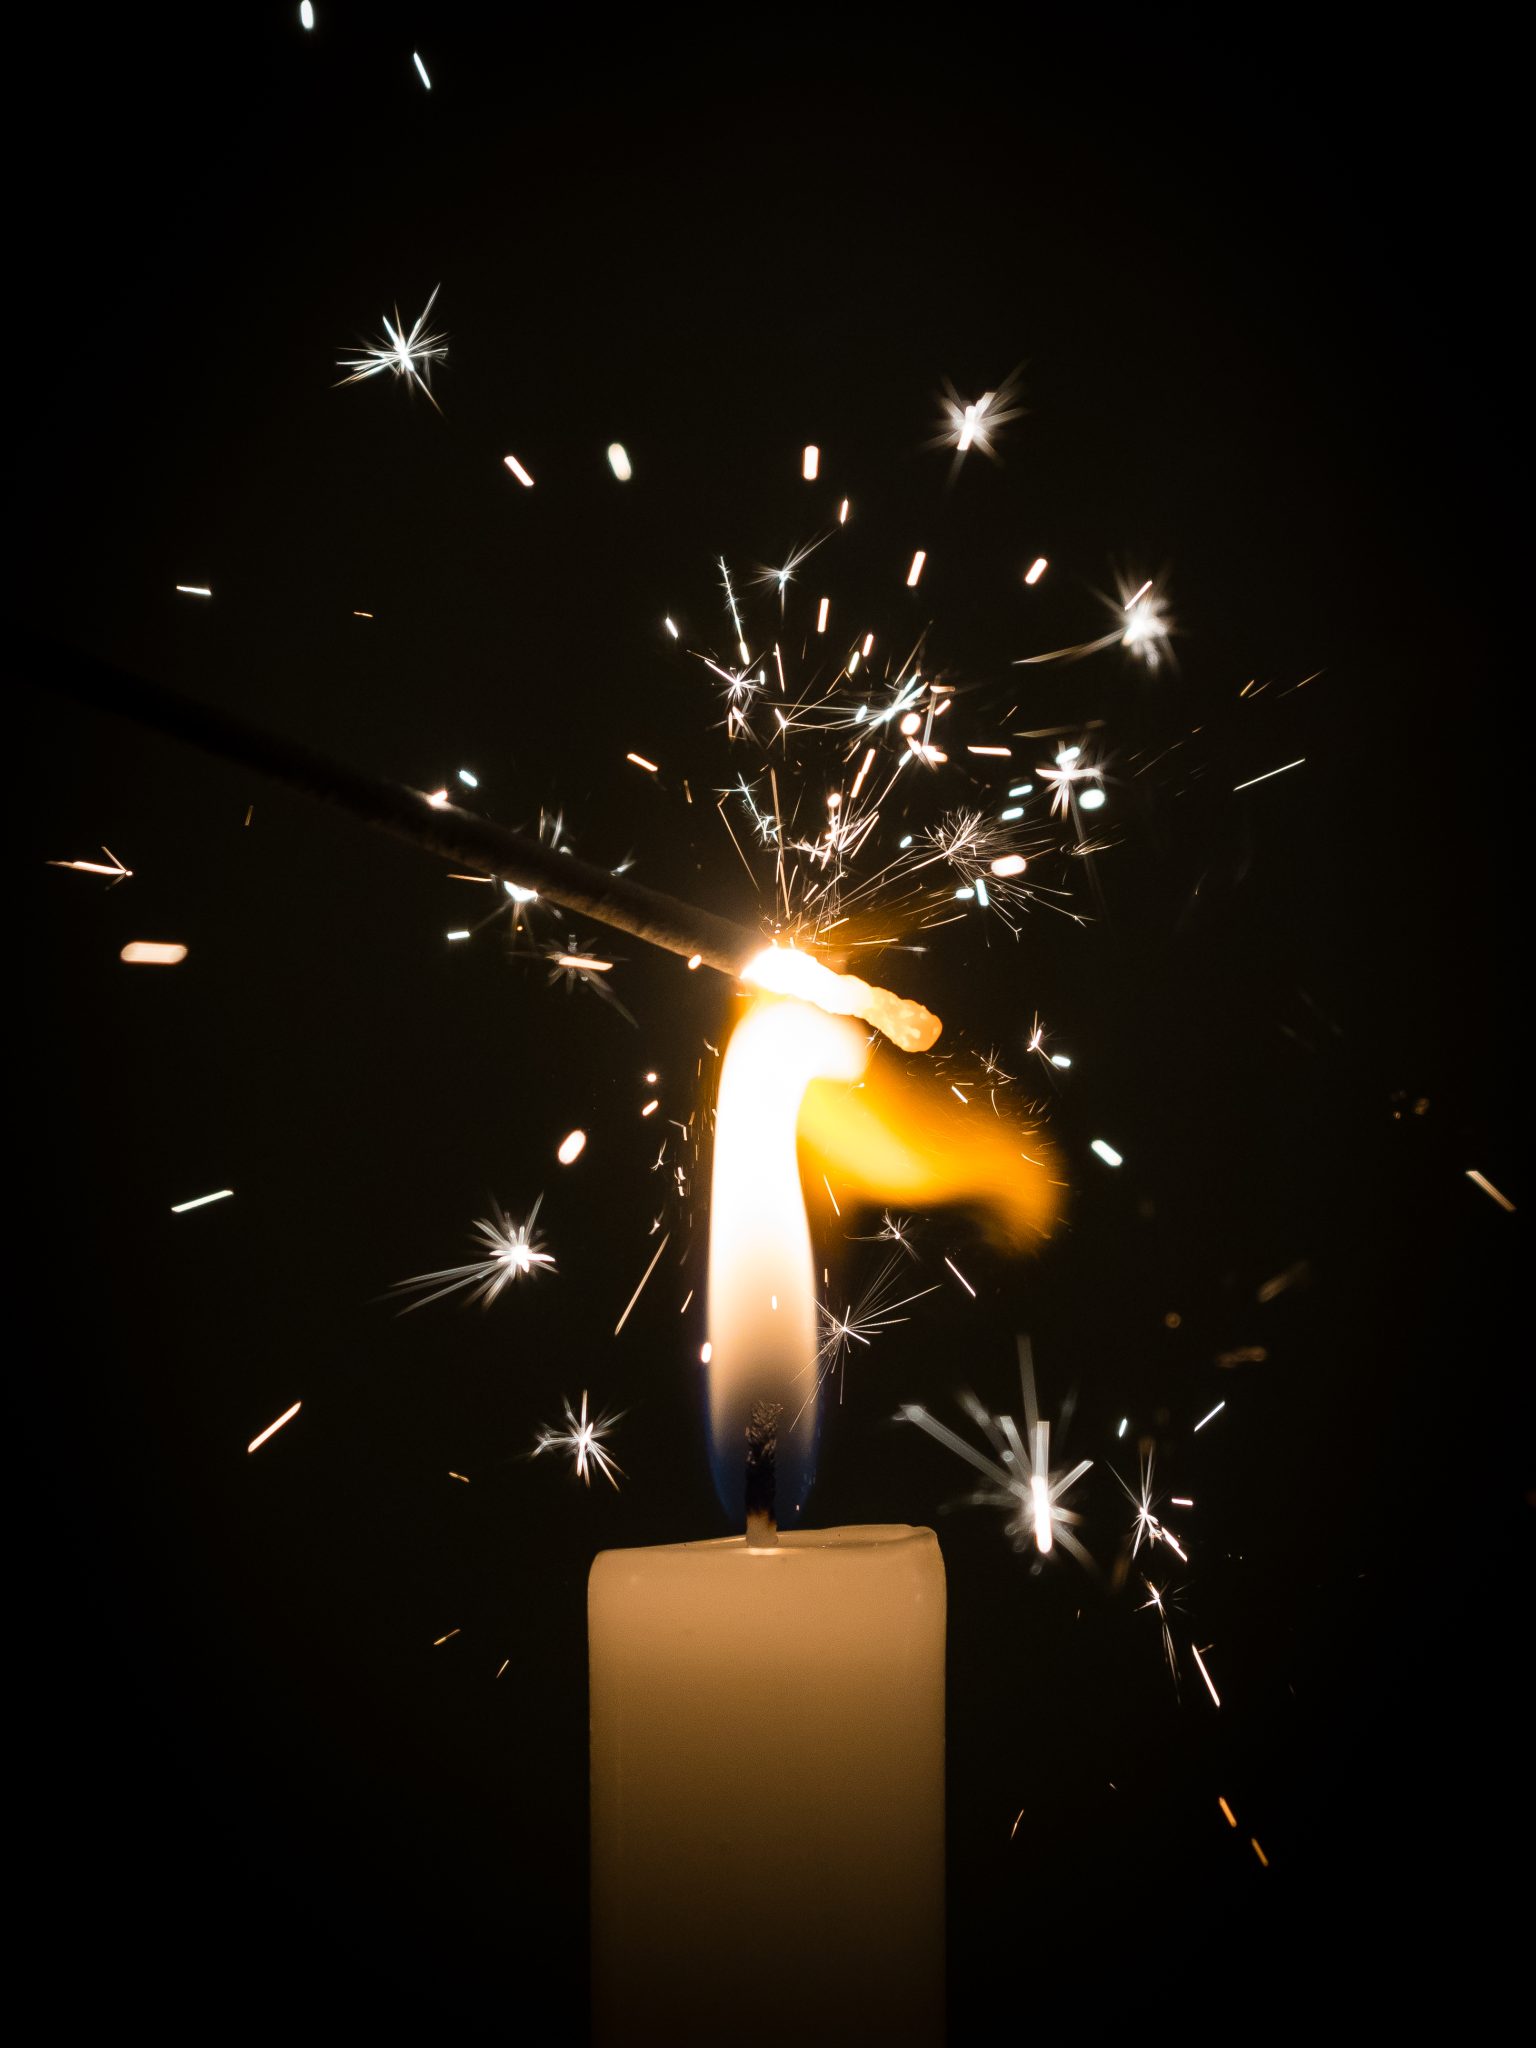 Detail of a sparkler being lit by a candle